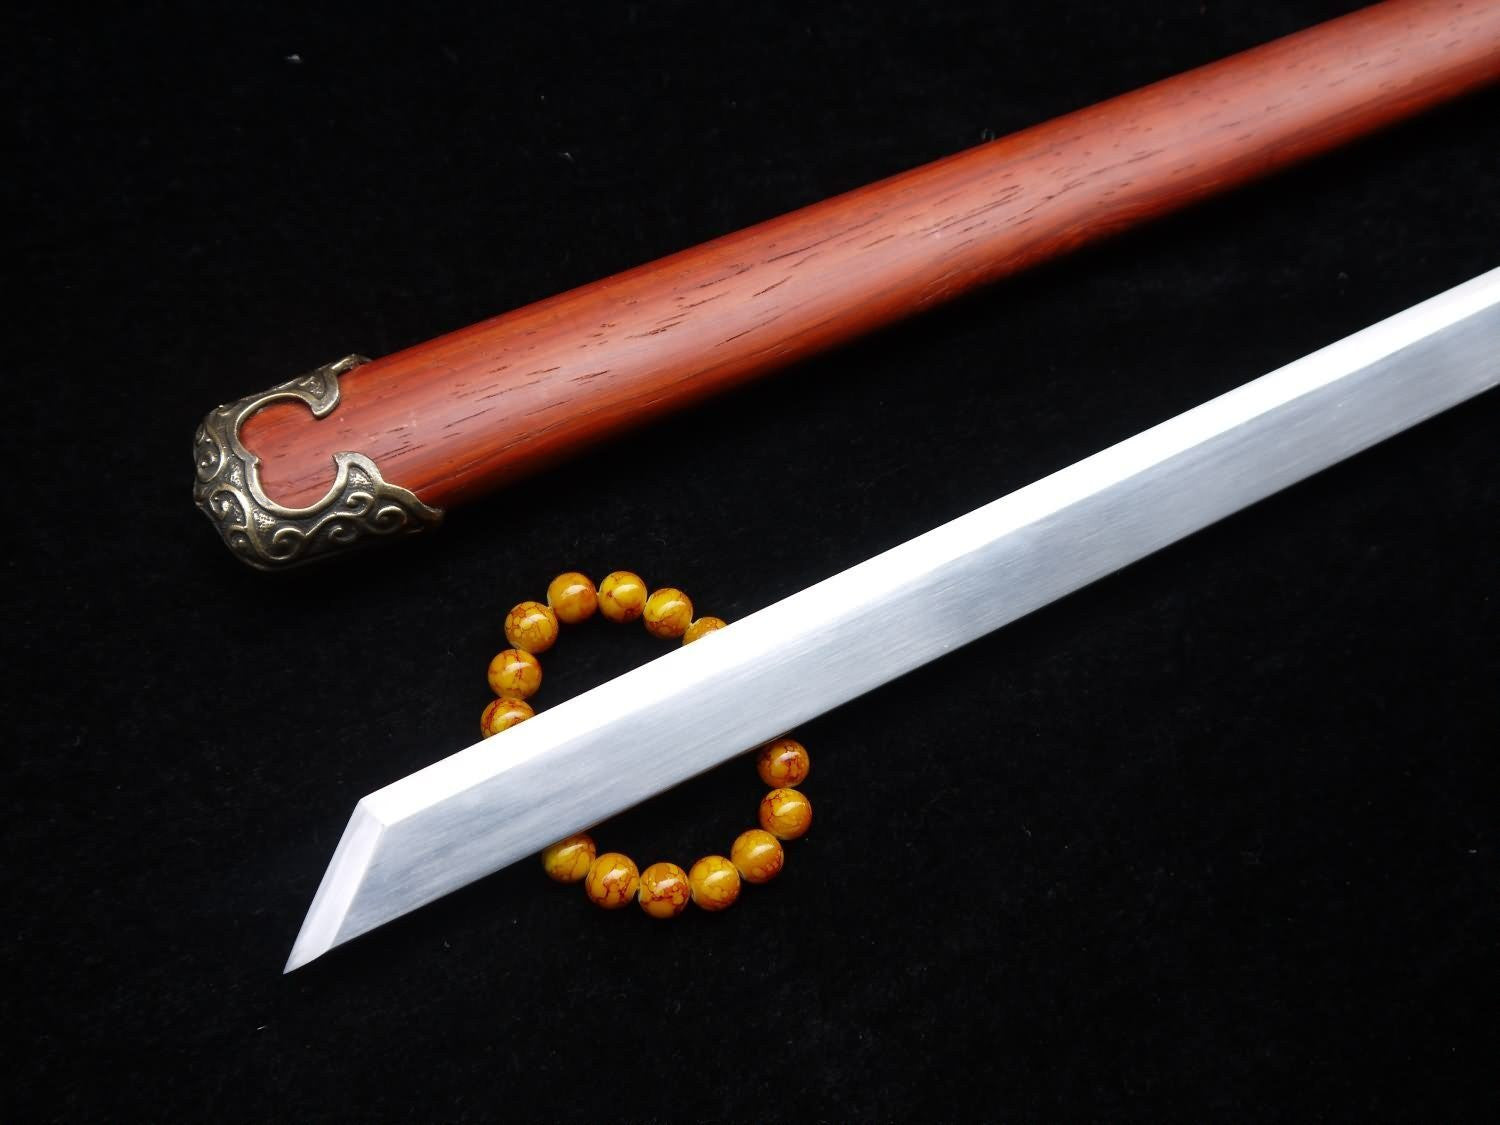 Tang dao/T10 High Carbon Steel/Redwood Scabbard/Brass fittings/Full Tang - Chinese sword shop